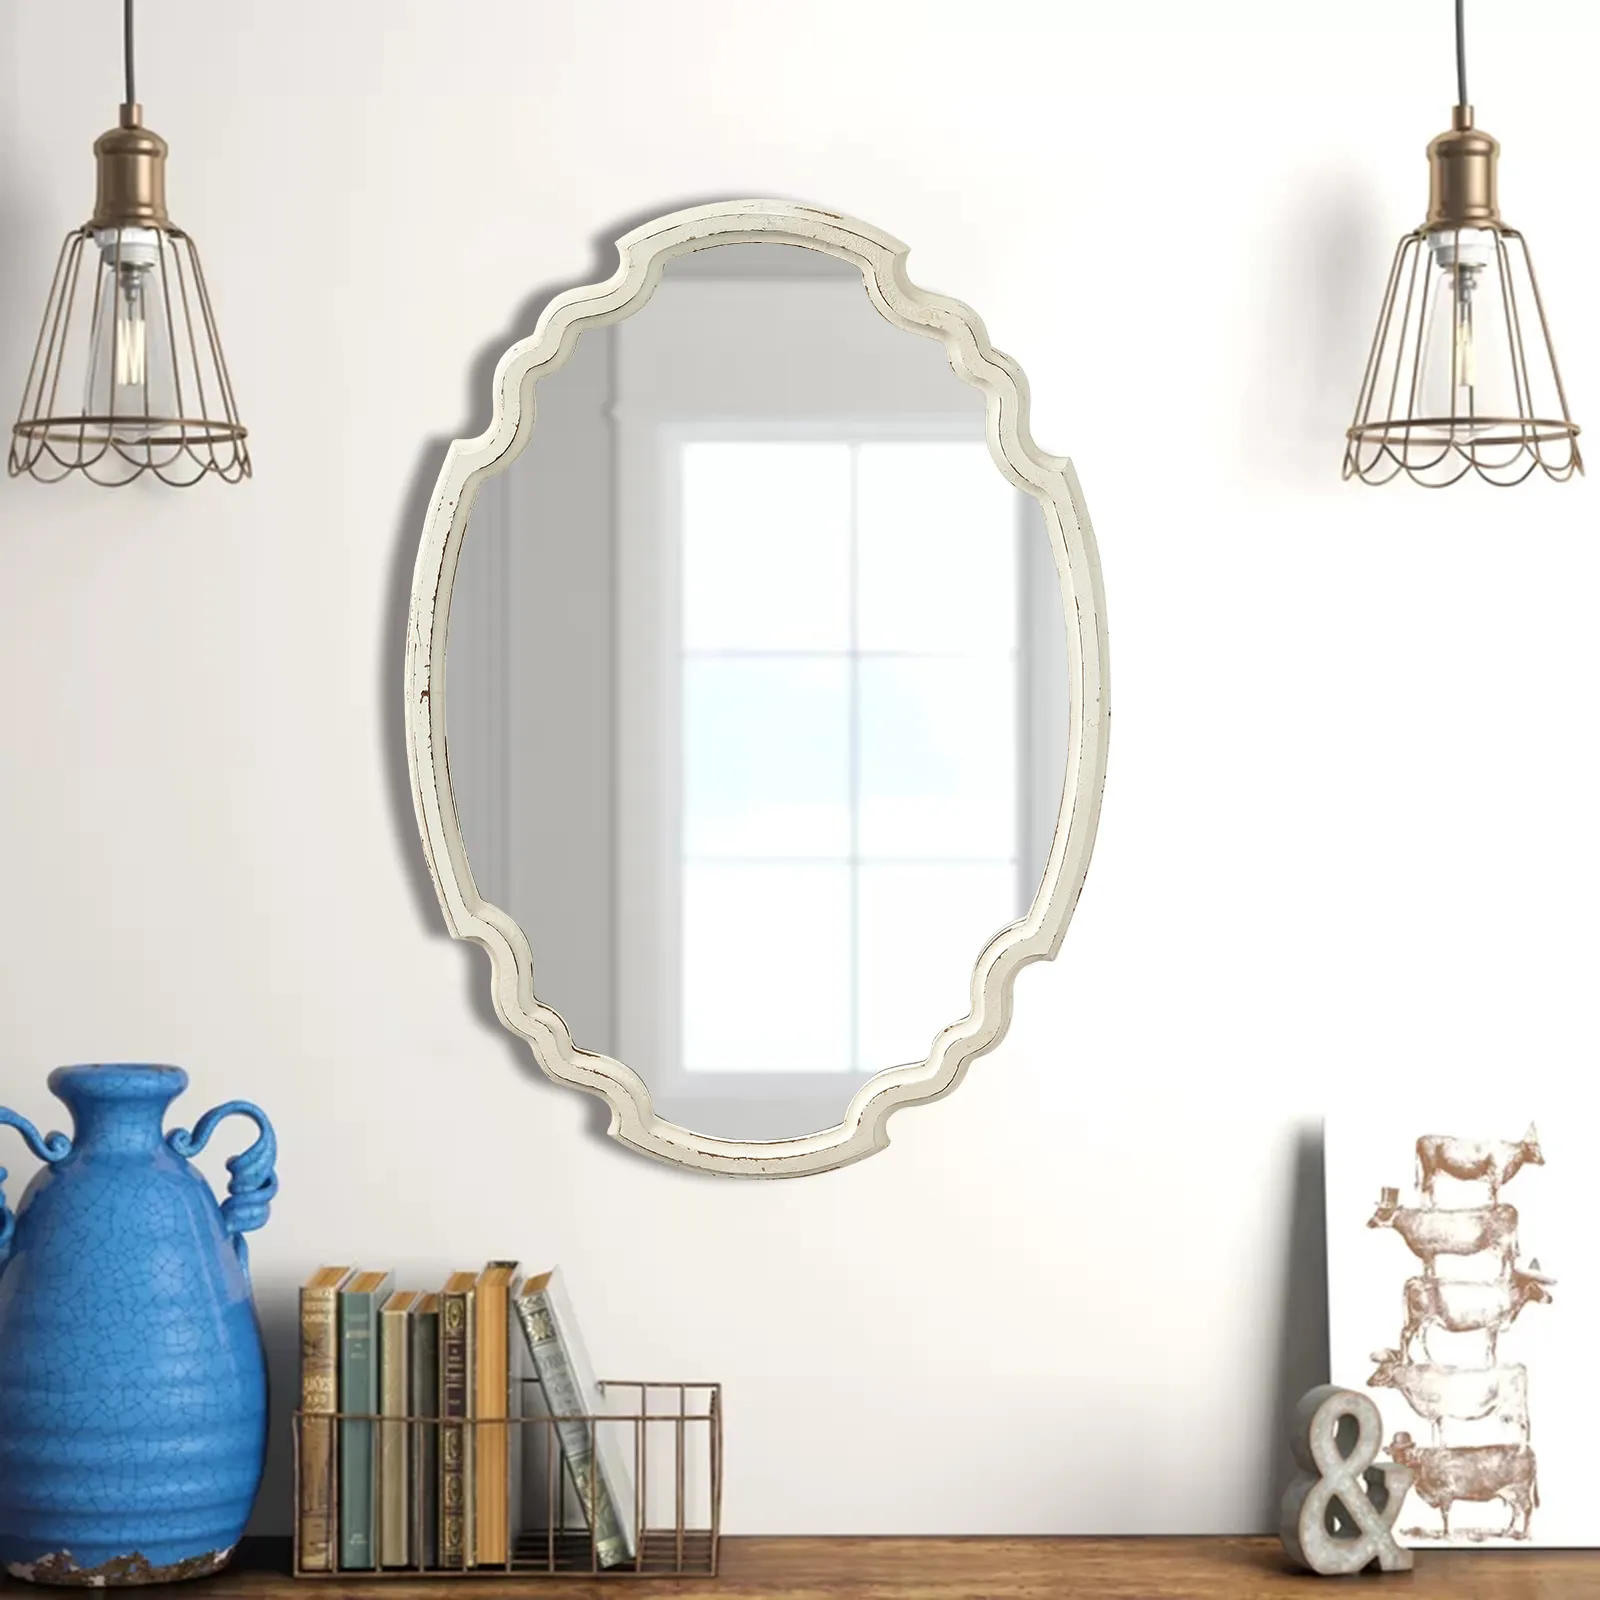 Rustic Oval Wooden Frame Wall Mirror, Hanging Ornate Decorative Mirrors, Traditional Wall Mirror for Home Decoration